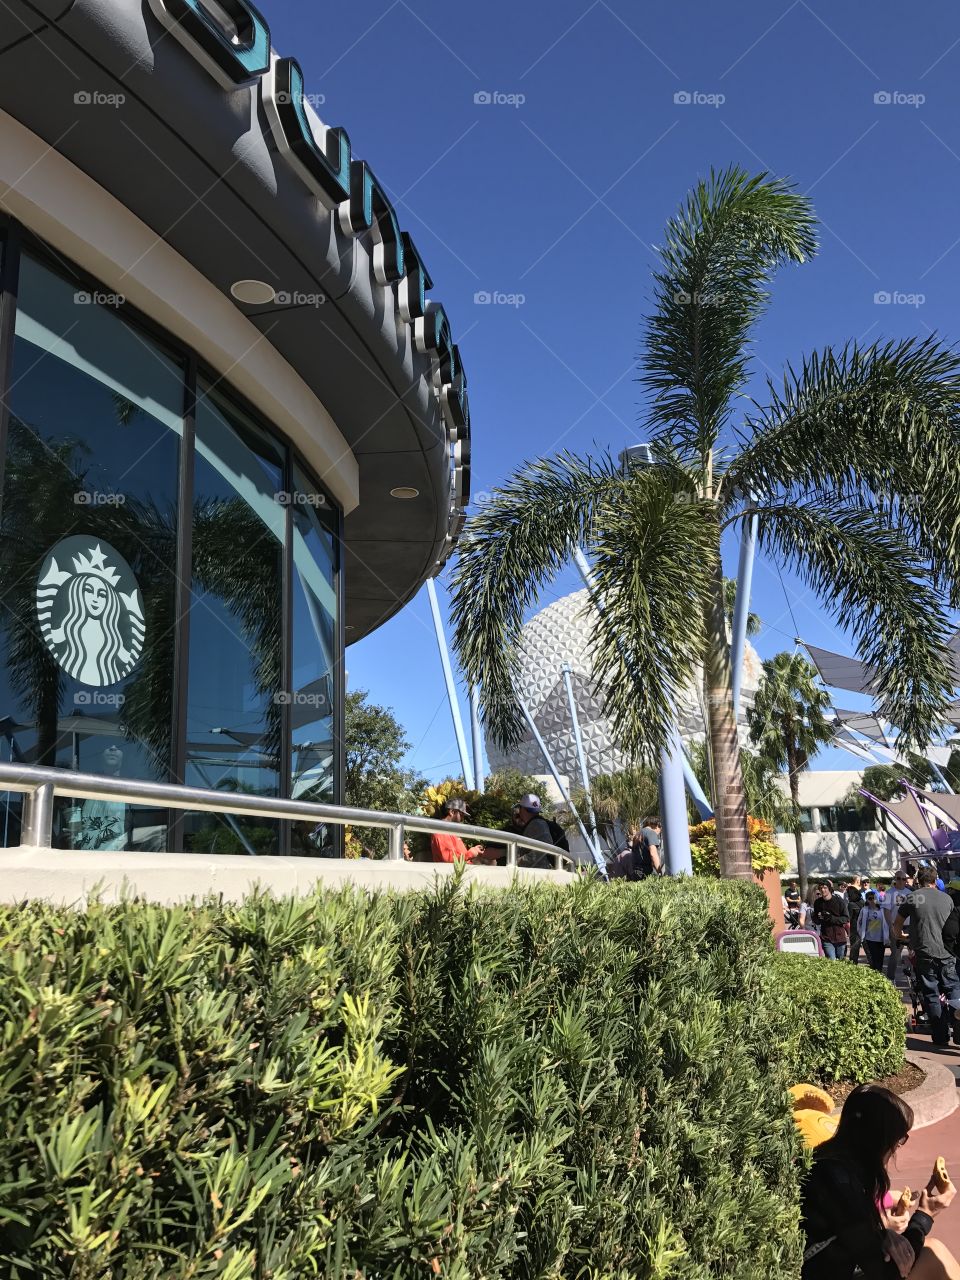 Starbucks coffee shop in front of the Spaceship Earth at Walt Disney World